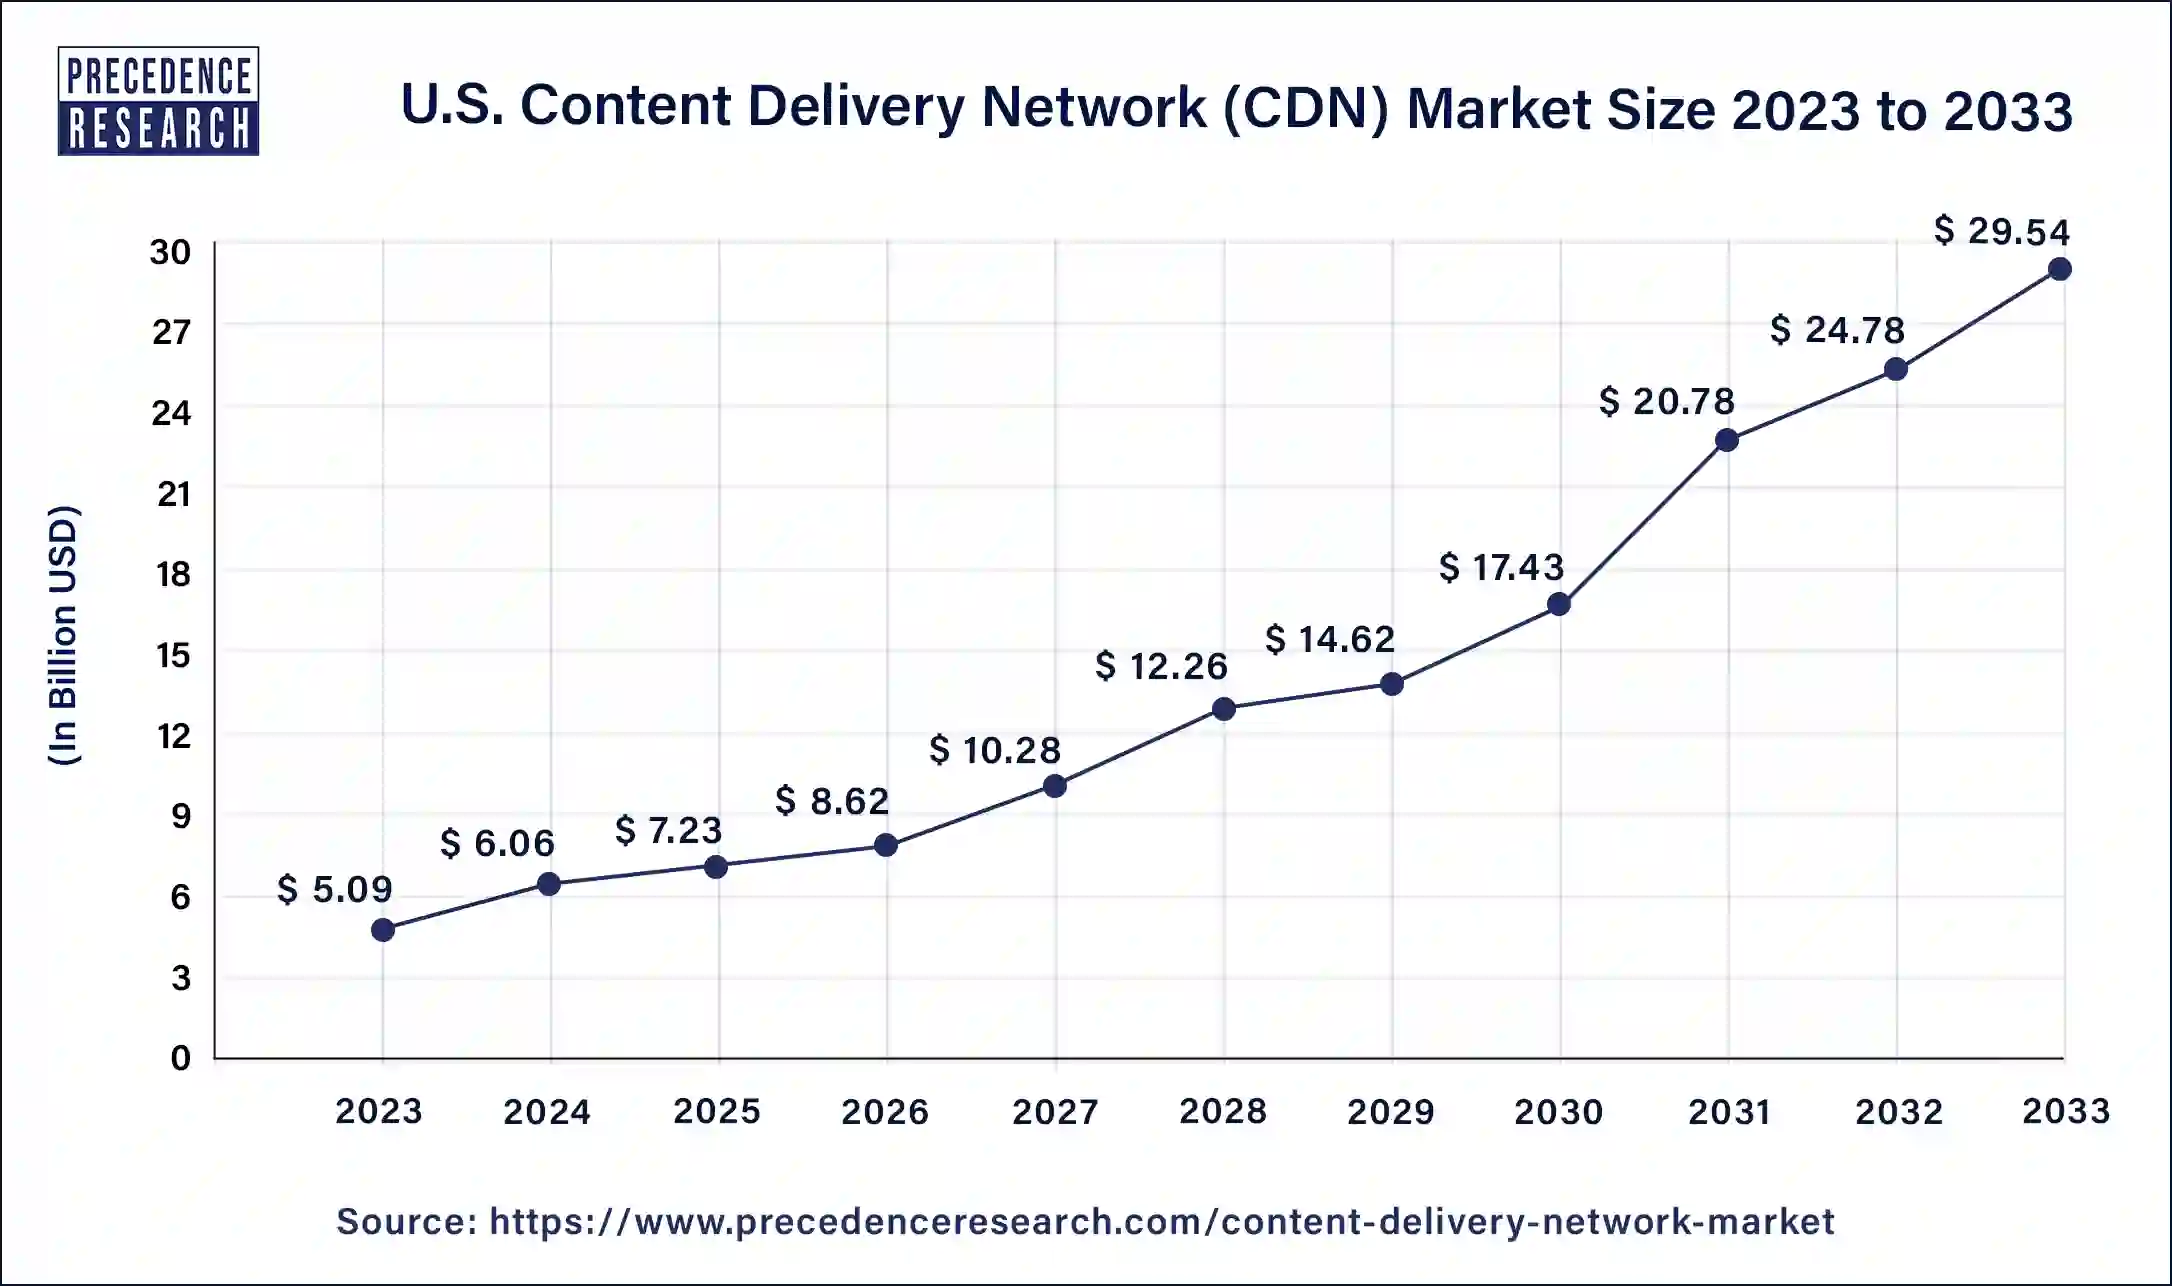 U.S. Content Delivery Network (CDN) Market Size 2024 to 2033